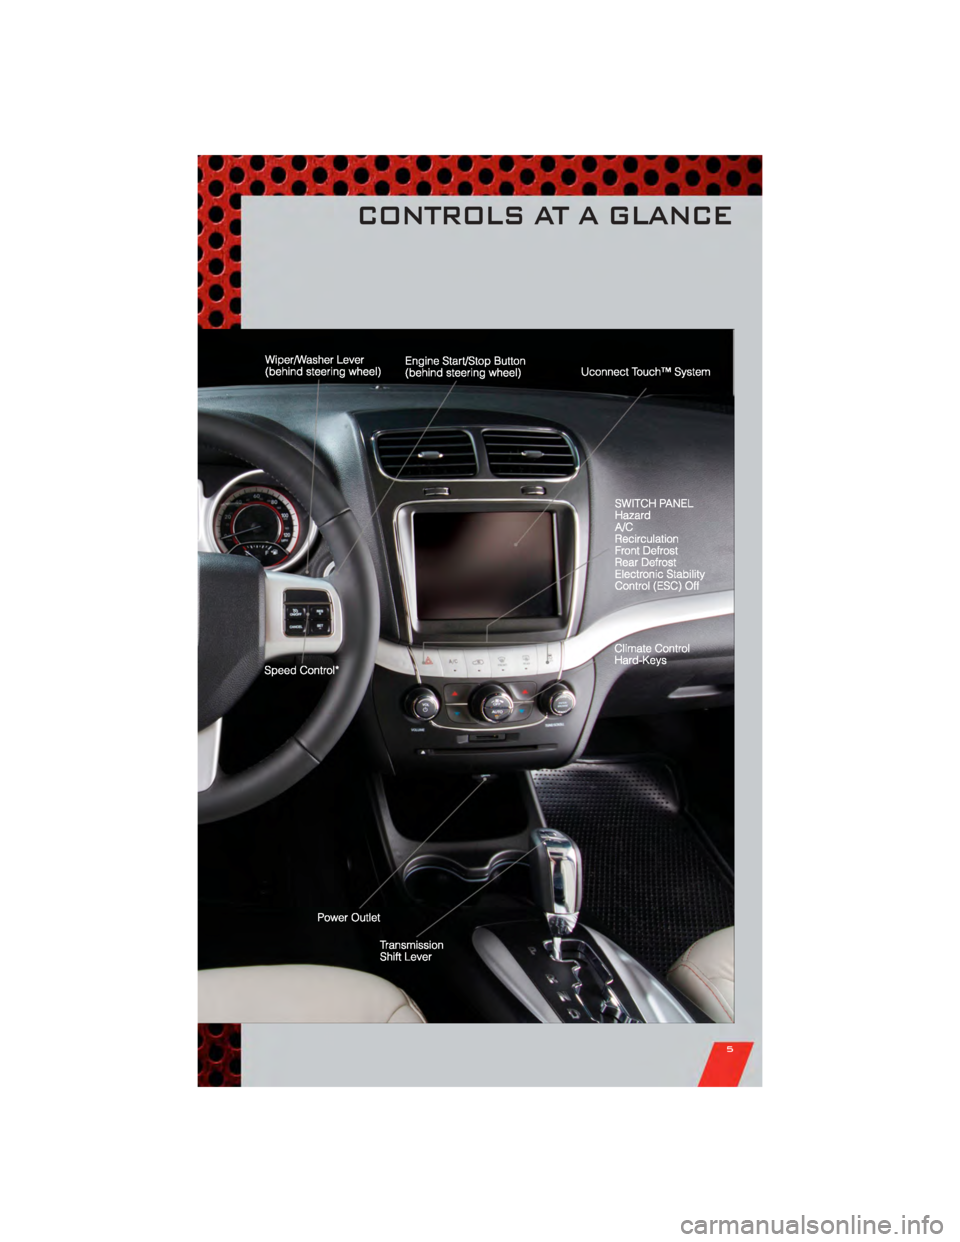 DODGE JOURNEY 2011 1.G User Guide CONTROLS AT A GLANCE
5 